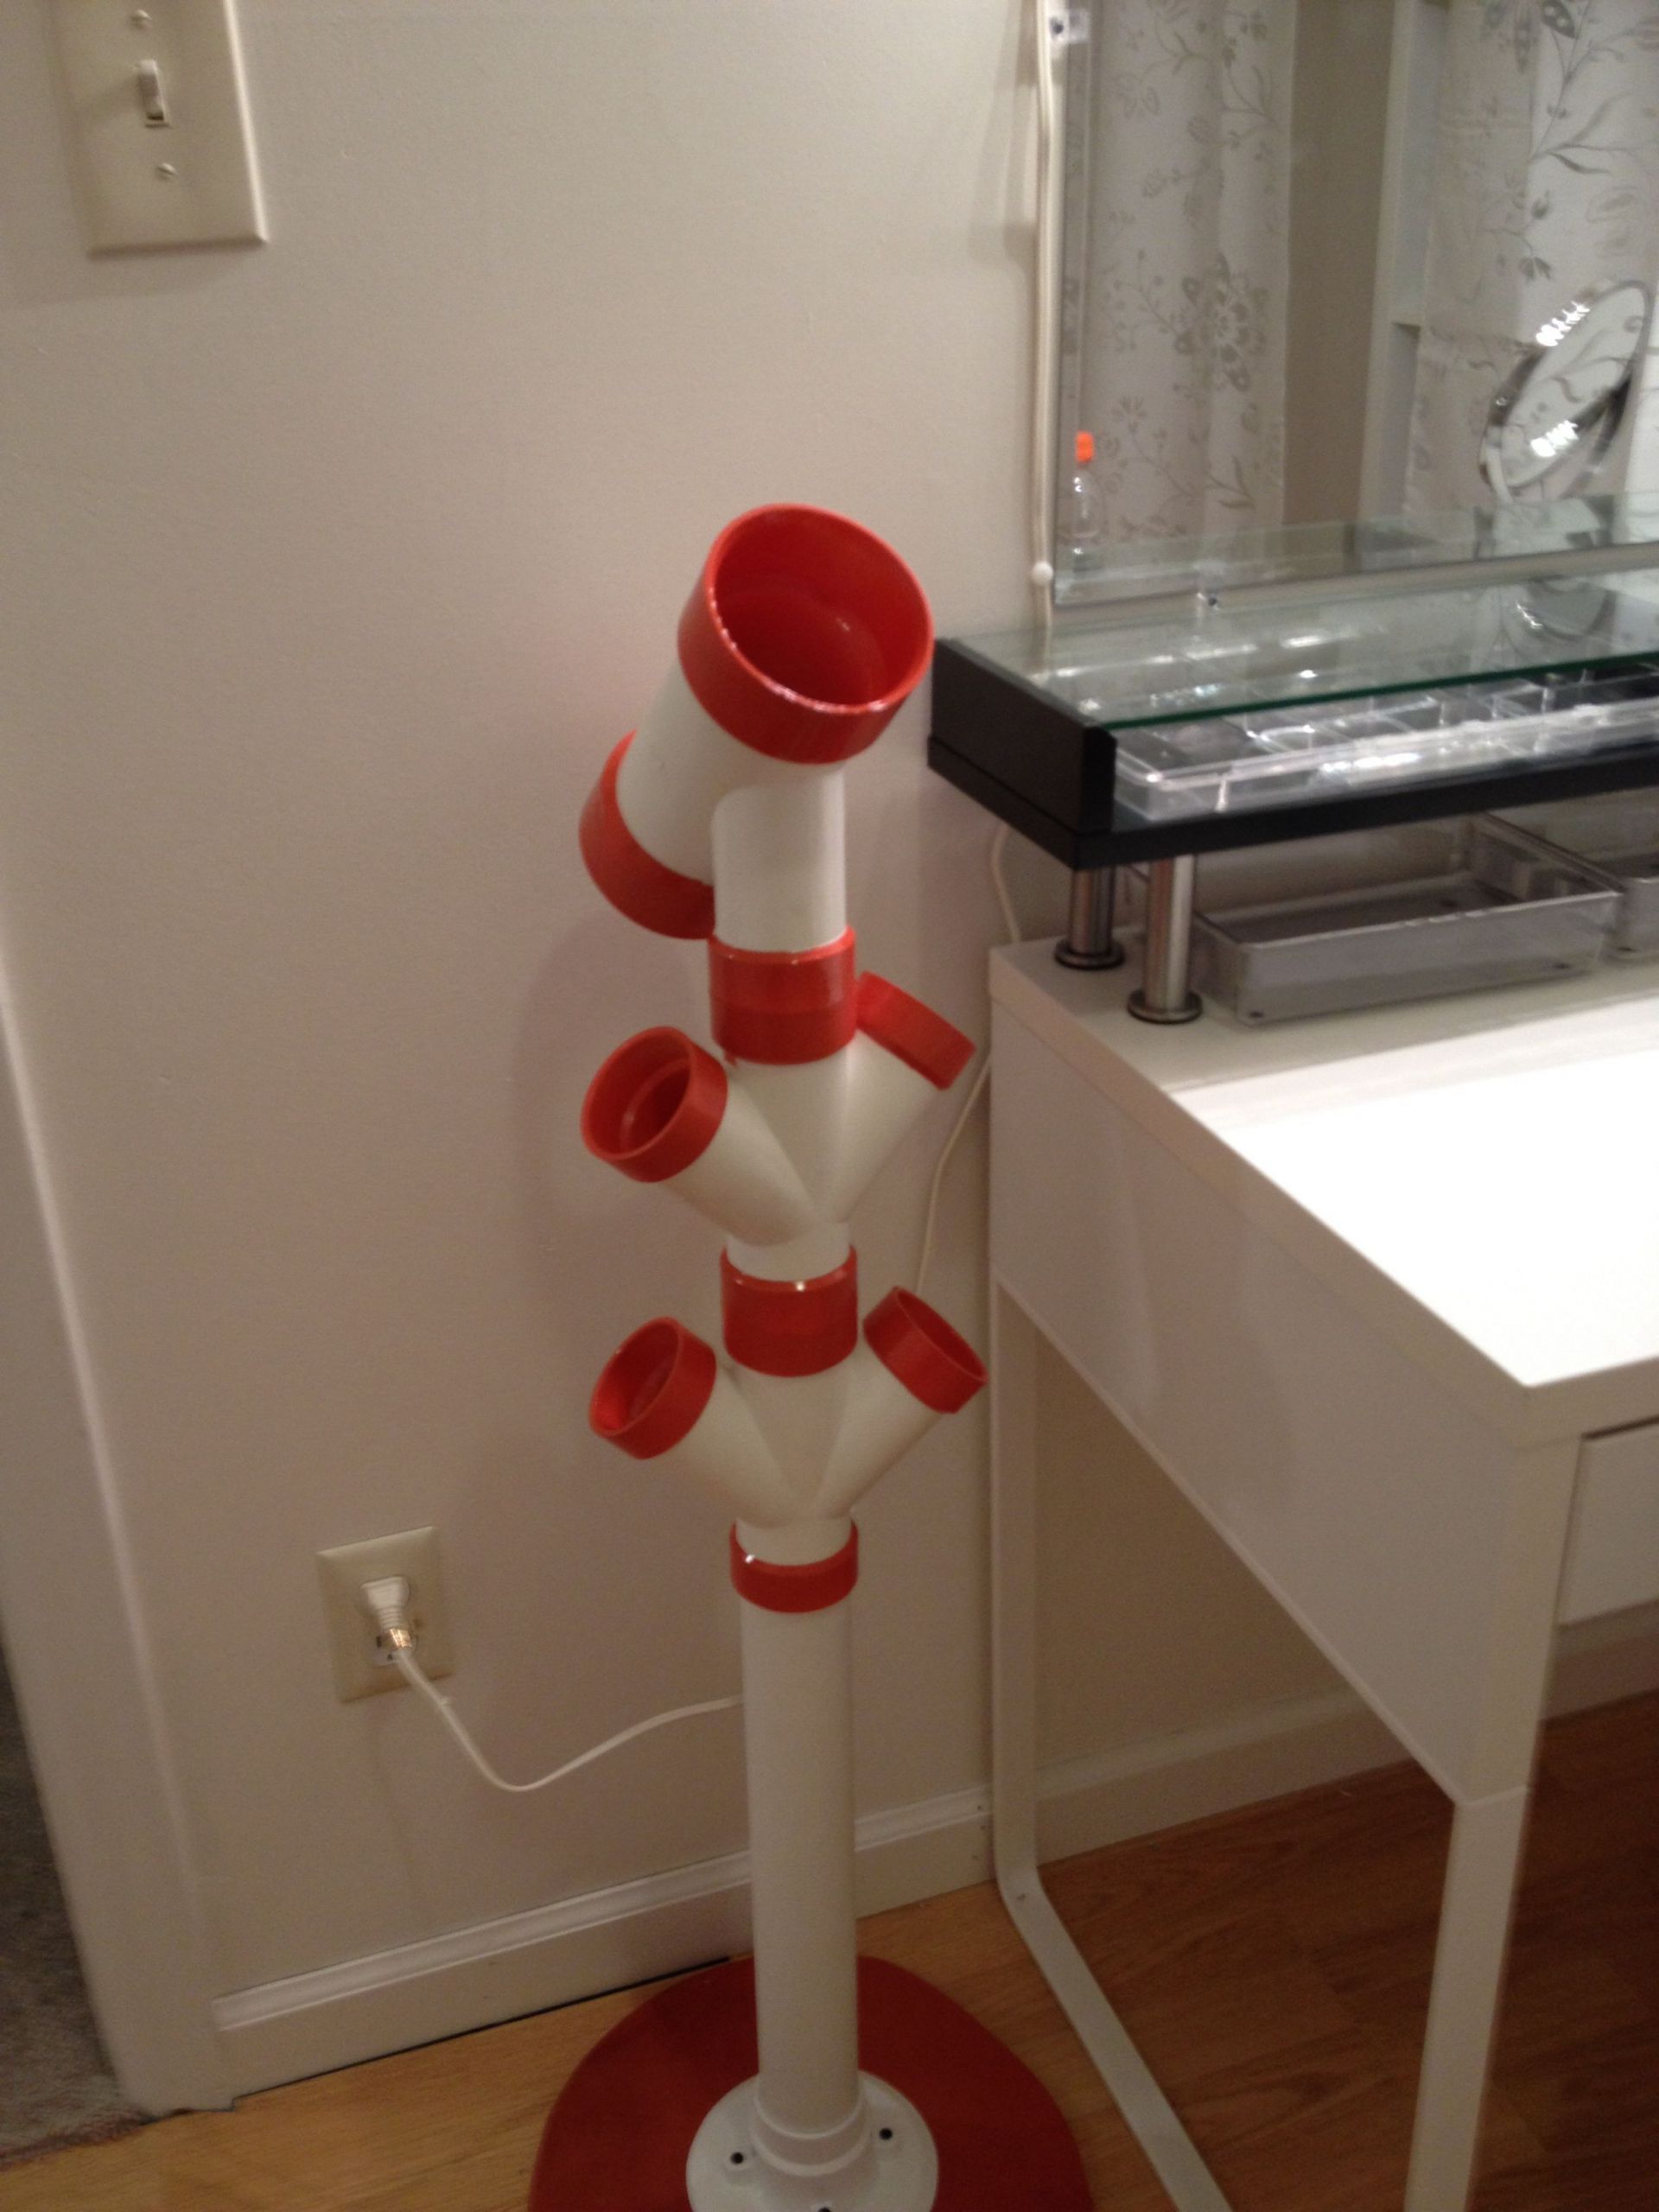 DIY Hair Dryer And Curling Iron Holder
 My take on curling irons and blow dryer stand …